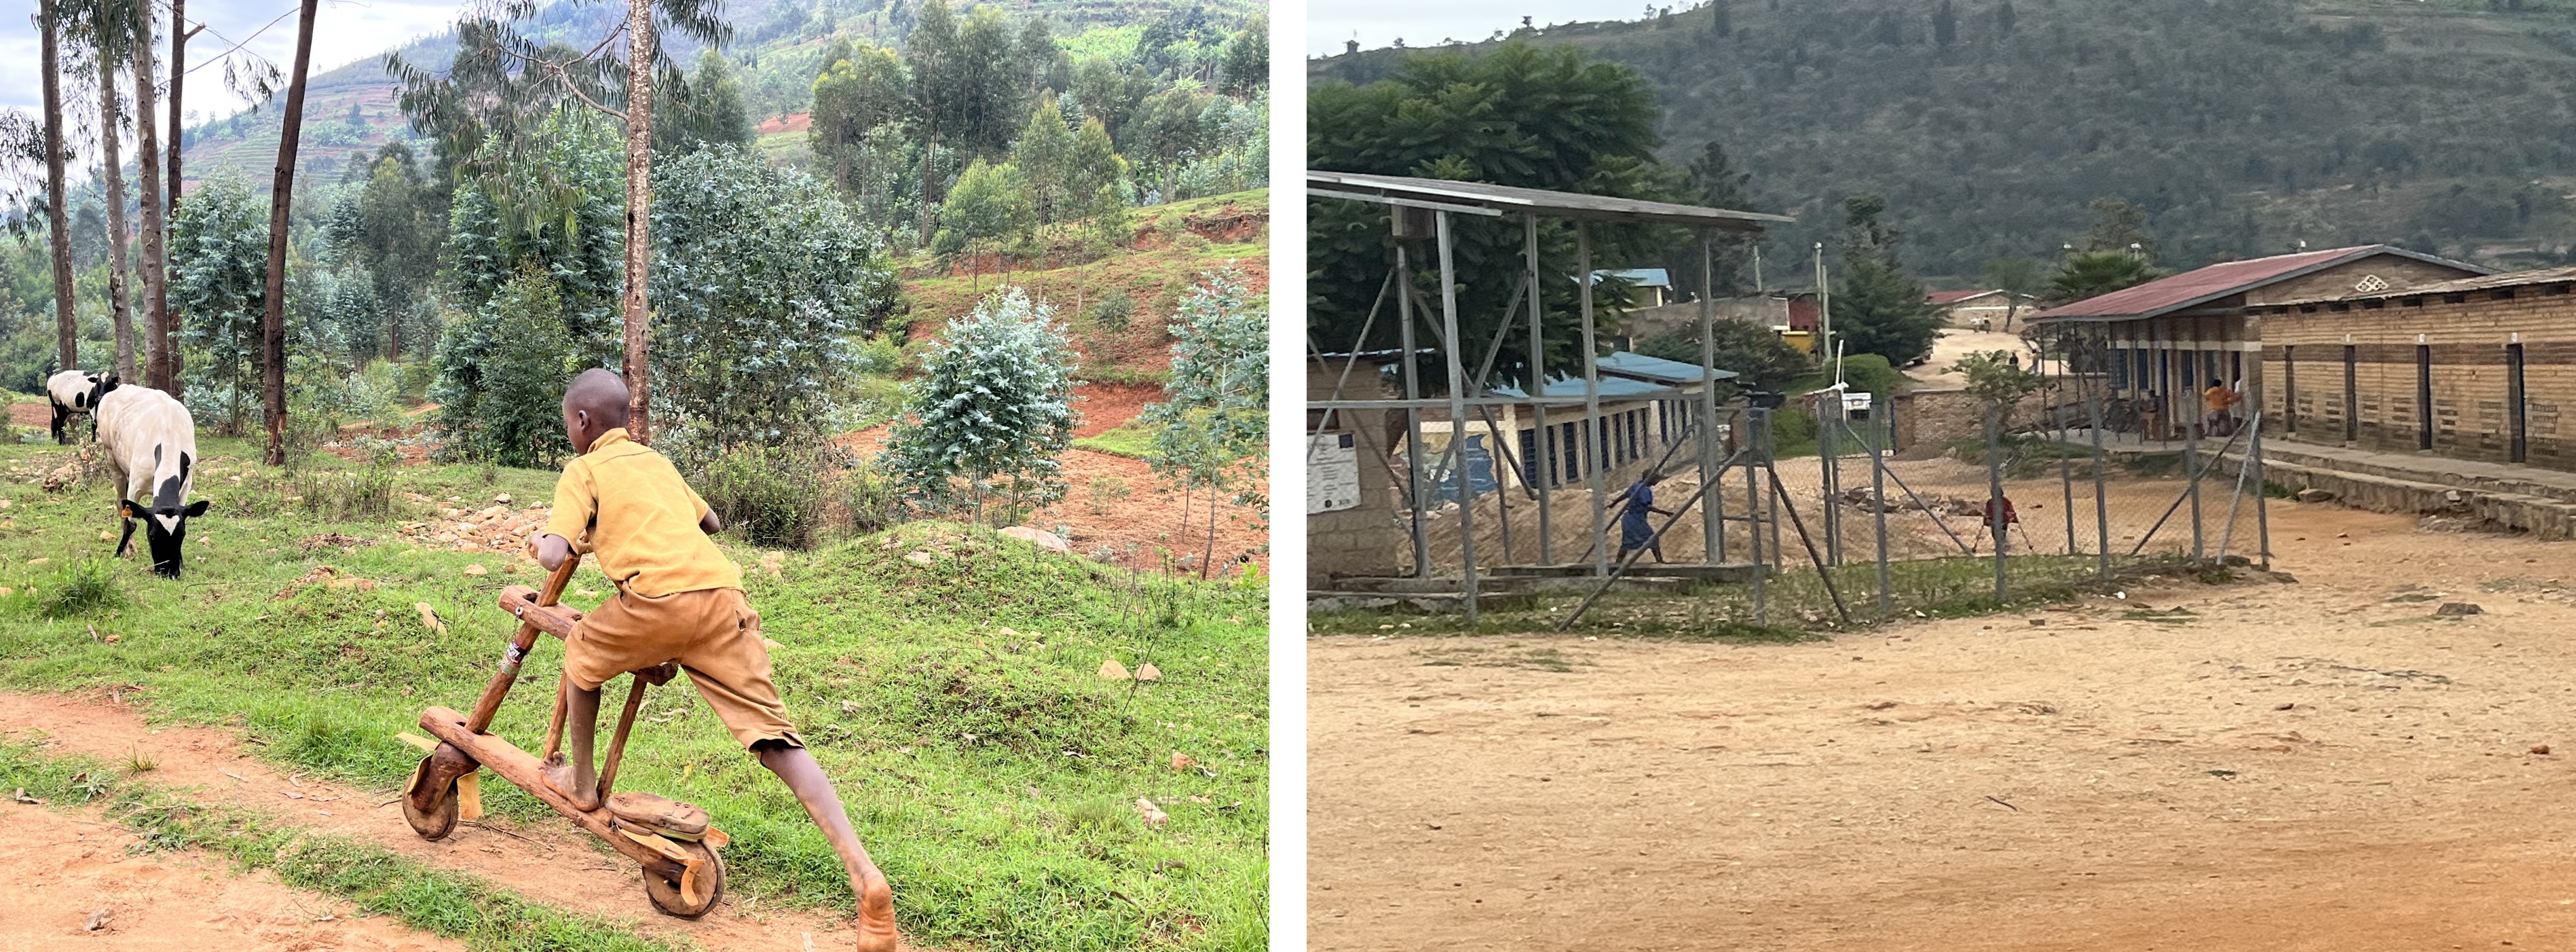 Two pictures. On the left is a child in Rwanda riding a wooden scooter down a dirt path. On the right is a child alone behind a metal fence.  